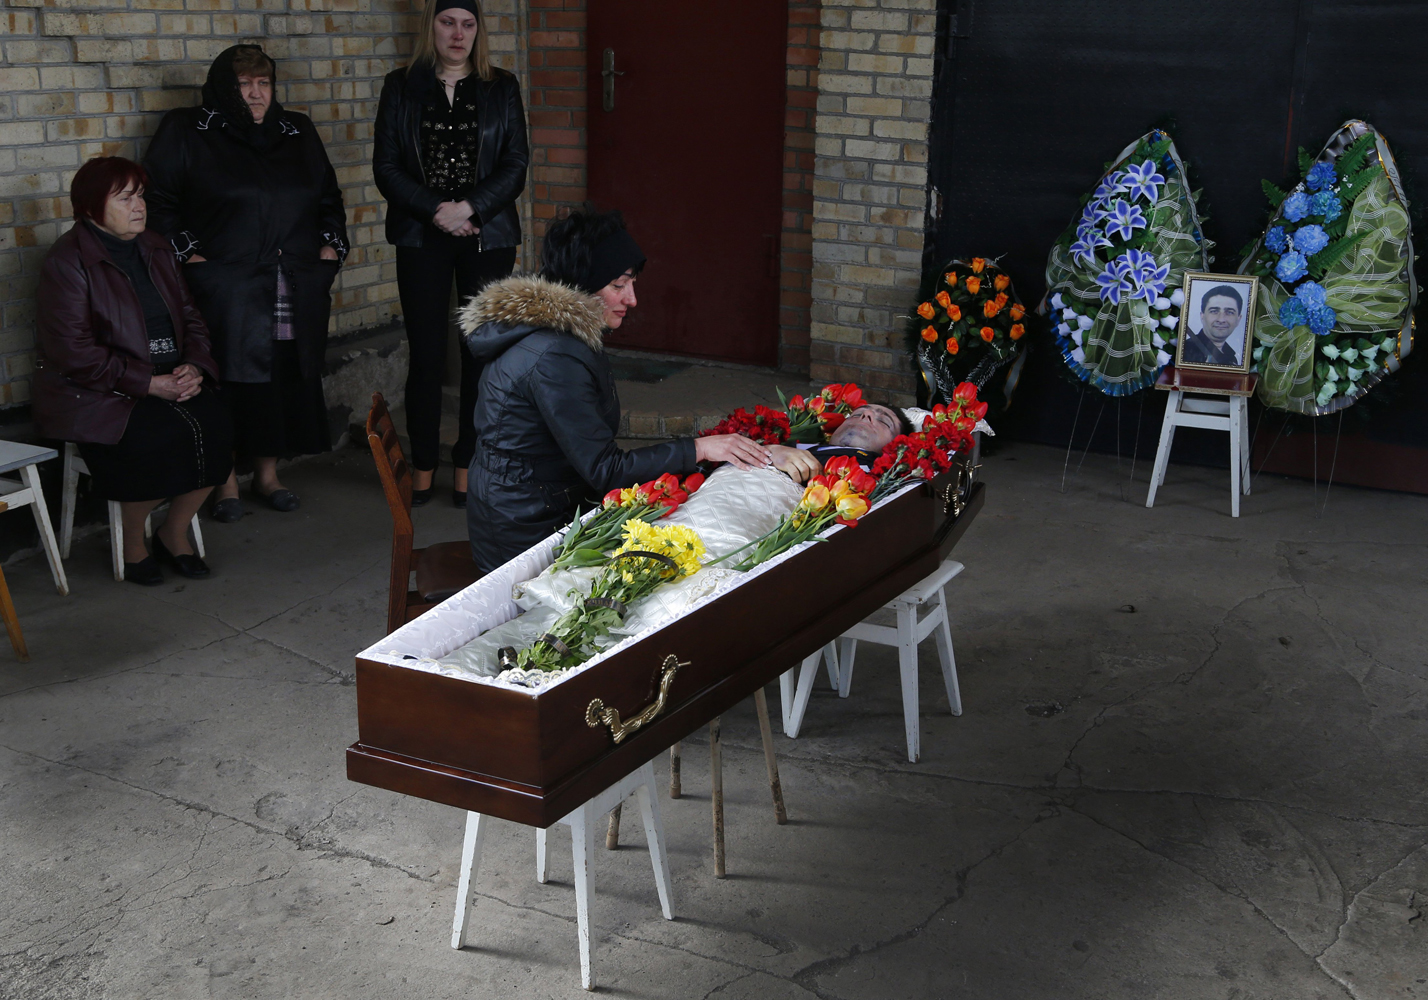 Apr. 24, 2014. The body of Ukrainian councilman Volodymyr Rybak lies in the coffin prior to his funeral after his body was found on Tuesday after his alleged abduction by pro-Russian insurgents in the eastern city of Horlivka, Ukraine.